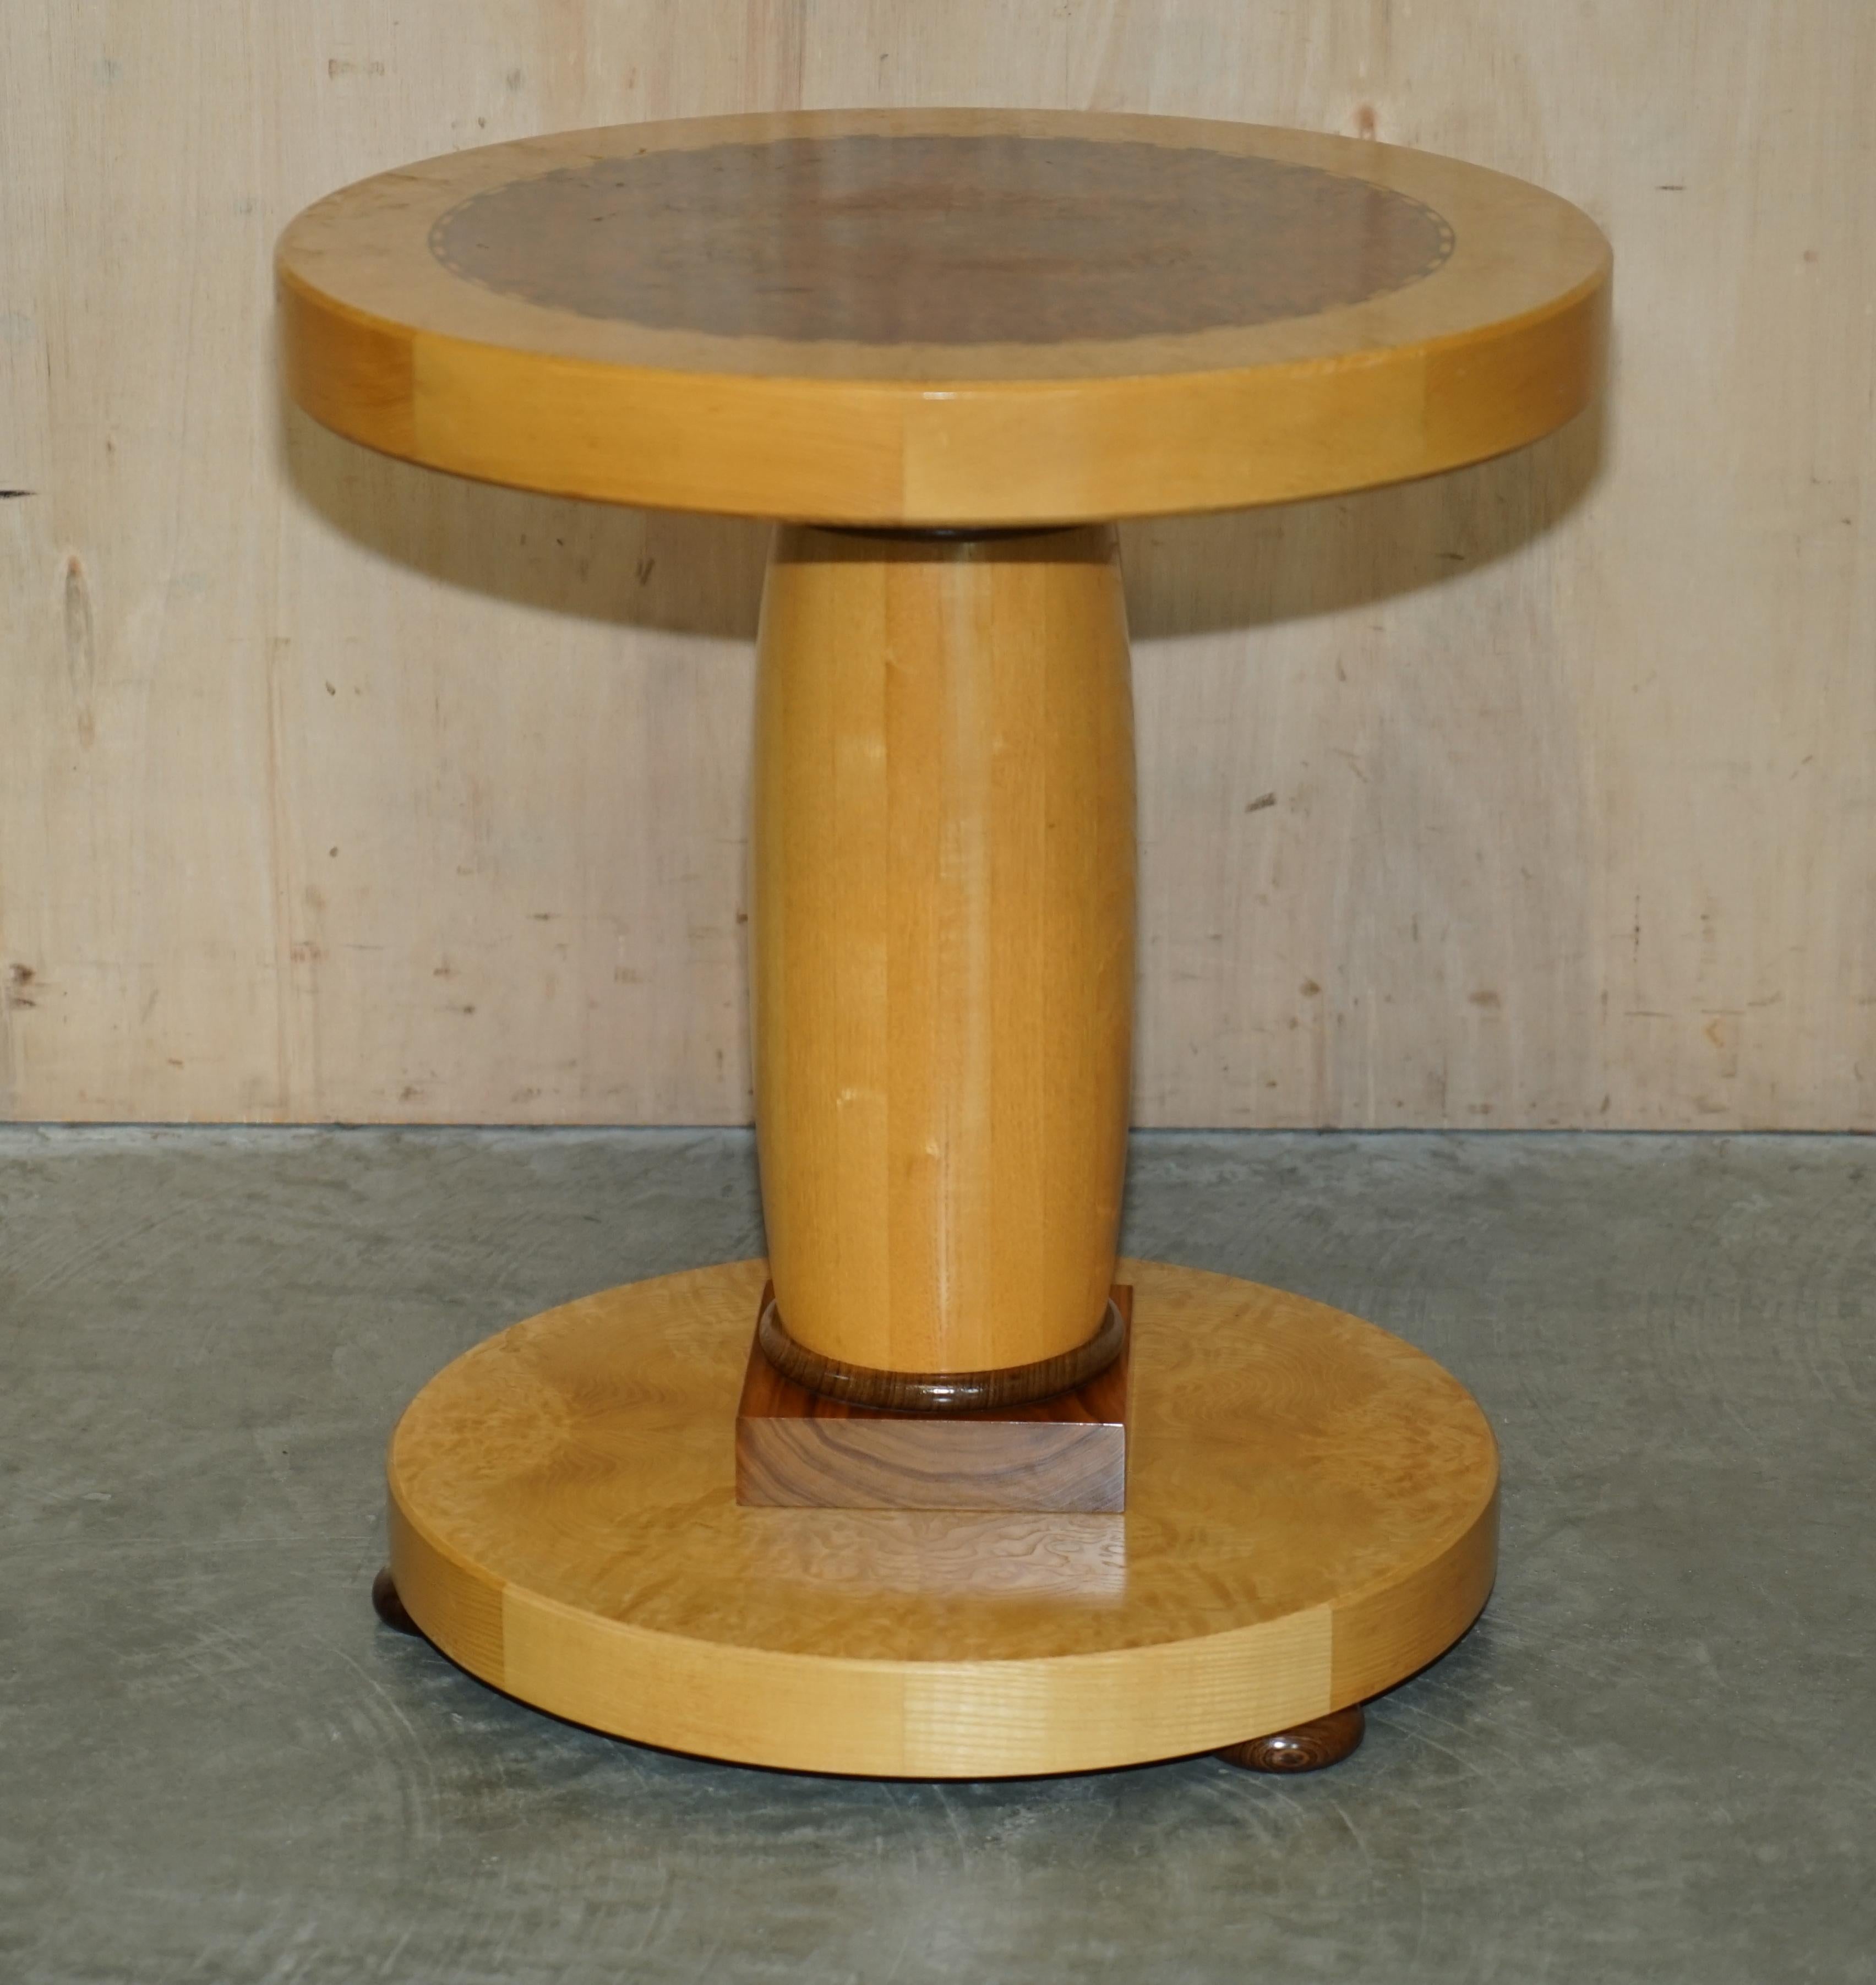 Royal House Antiques is delighted to offer for sale this sublime designer Andrew Varah Burr Walnut, Satinwood & Oak oversized side table which is part of a suite.

I have in total a huge dining table, an oversized coffee table, a console table, a